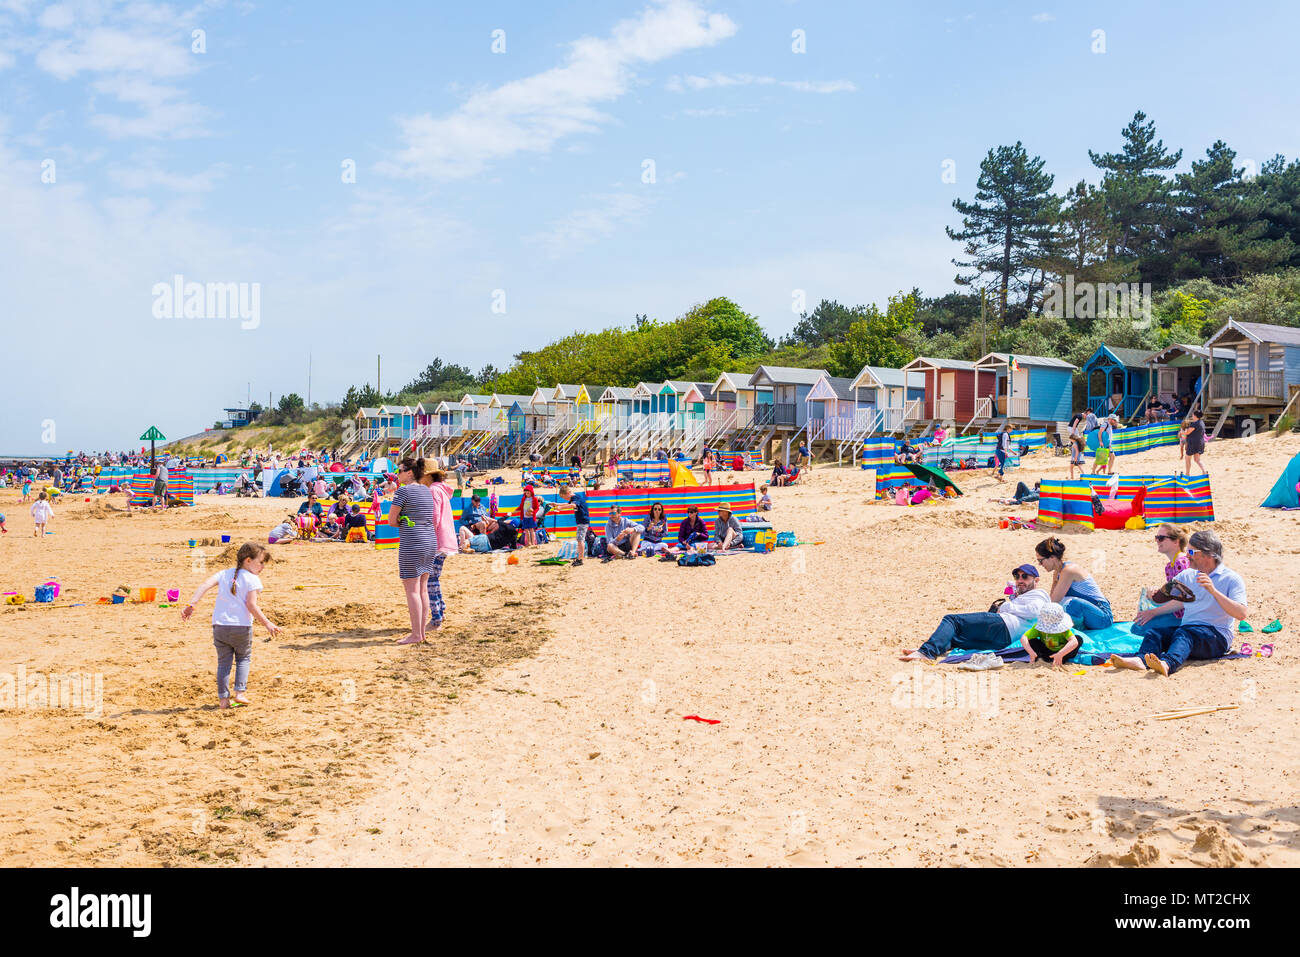 Wells-next-the-Sea, Norfolk, UK. 27th May 2018. People enjoying the sunny warm day during the Bank Holiday weekend  on the beach in Norfolk. Credit: Nicola Ferrari/Alamy Live News. Stock Photo